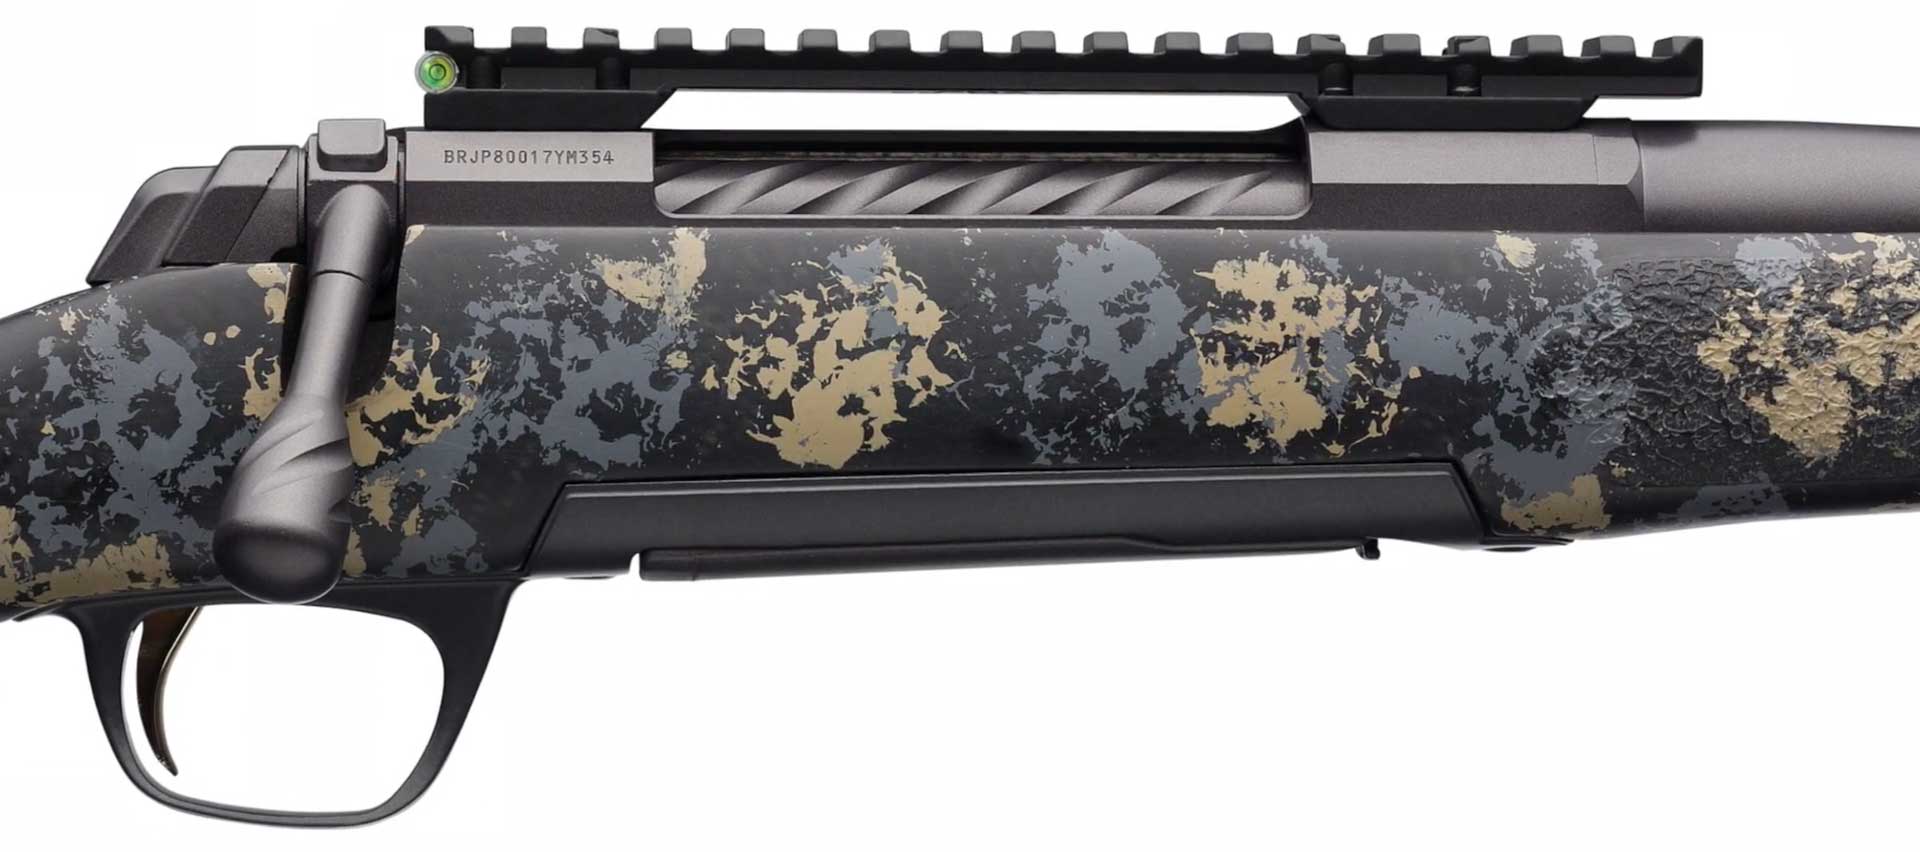 right side bolt-action receiver and stock camouflage paint gun